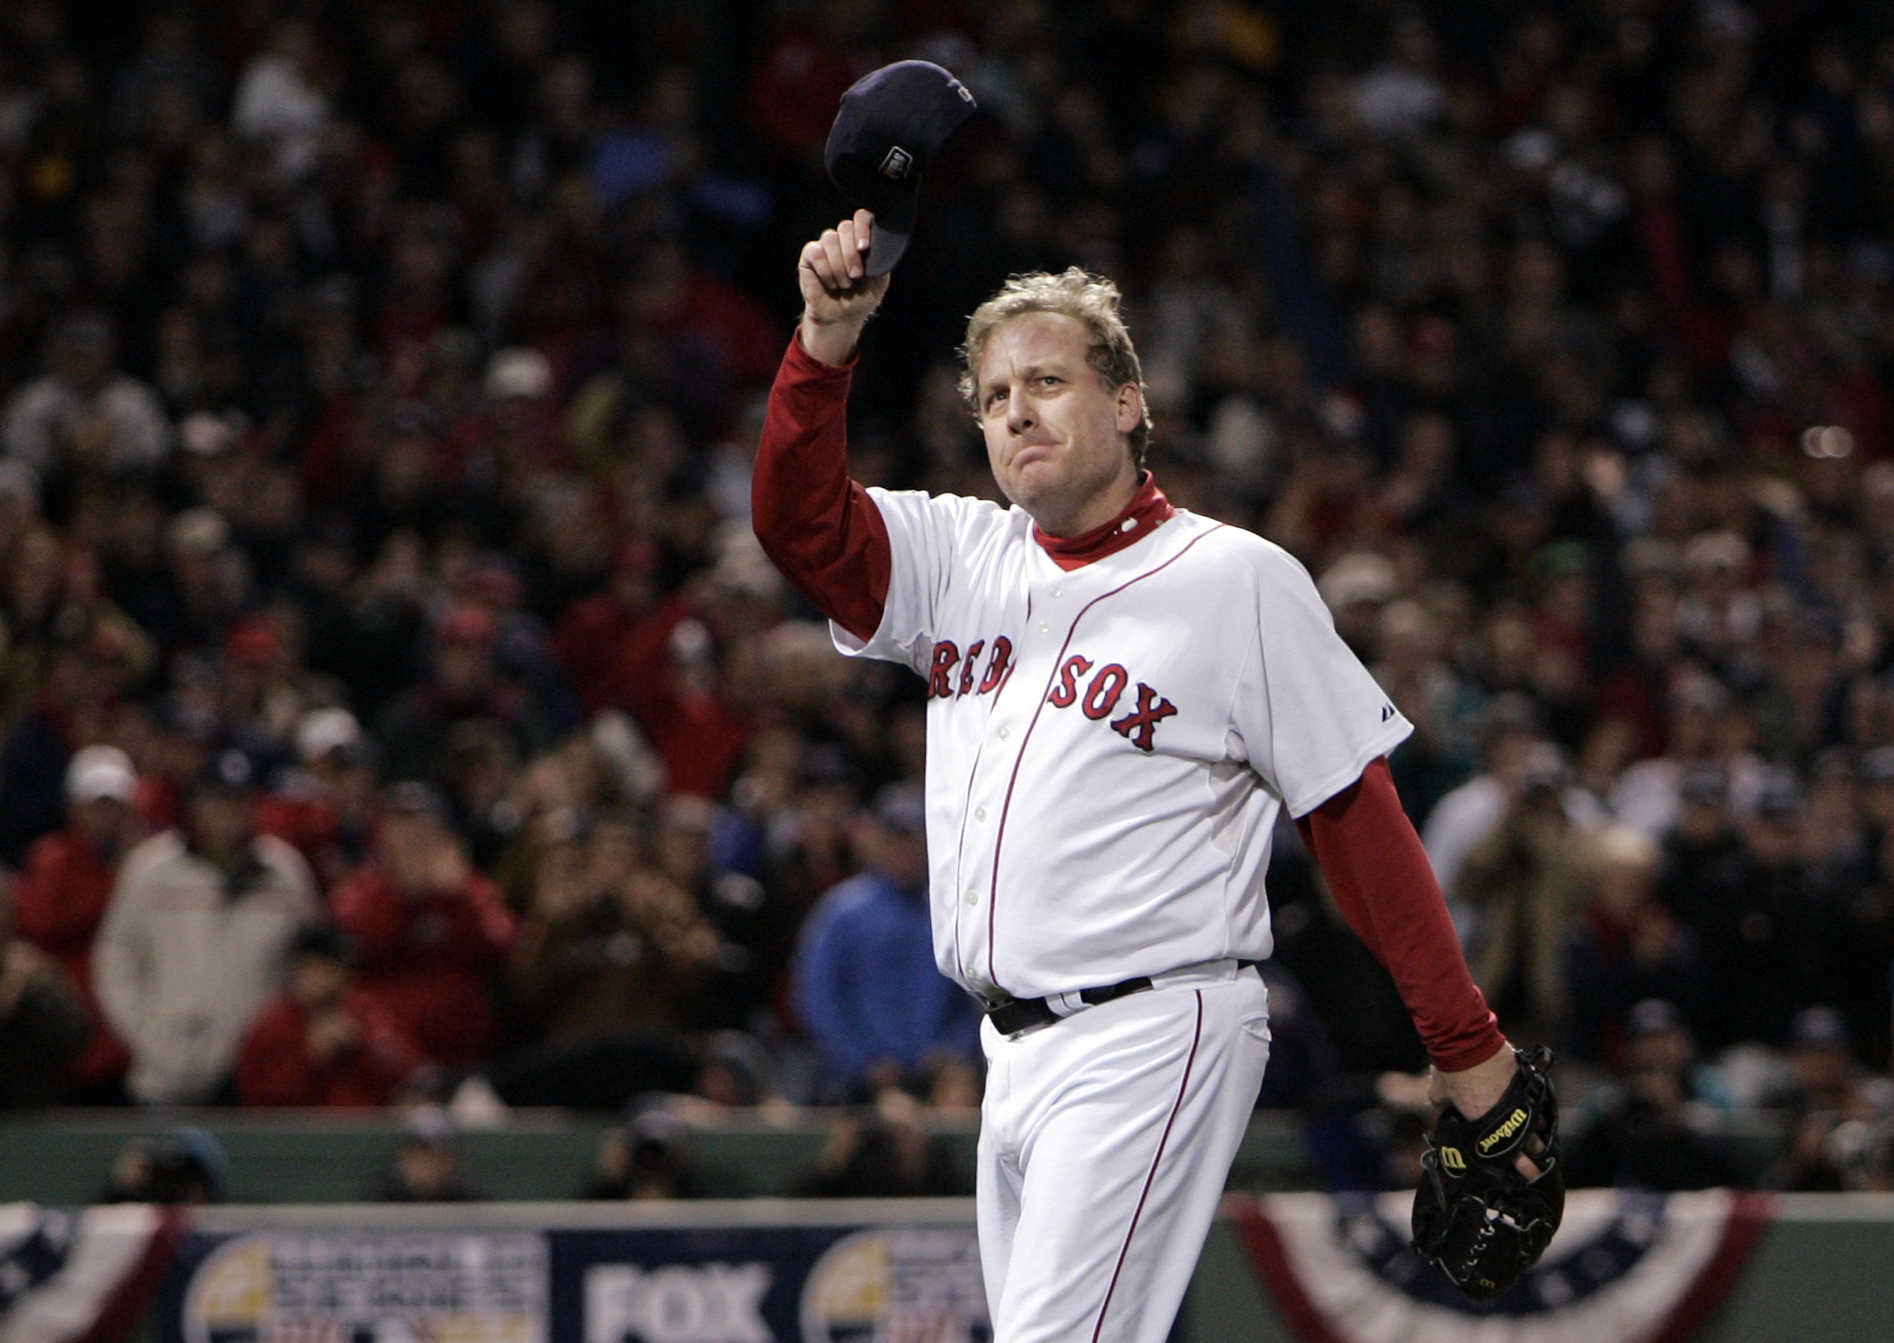 Bleep you, Boston! Curt Schilling disses Red Sox Nation with Hall